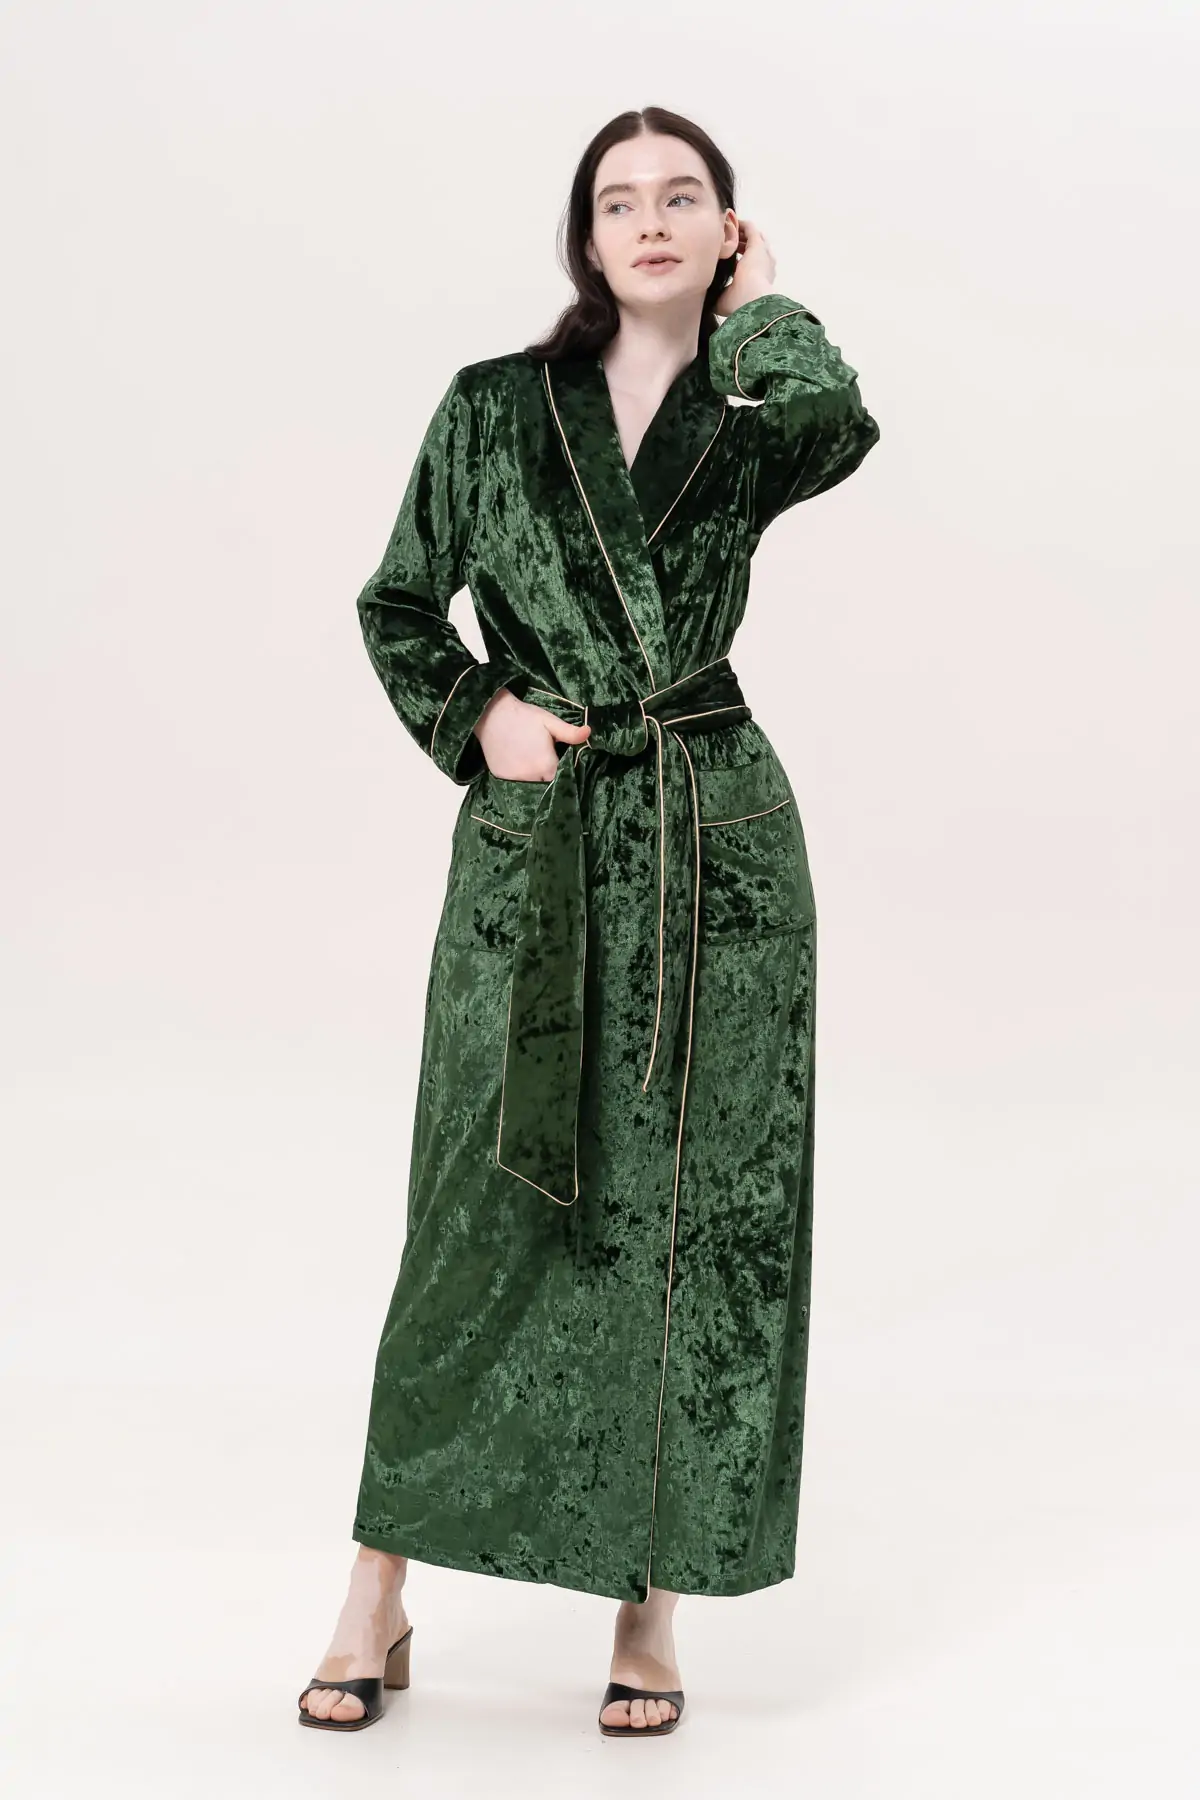 Dressing-gown ankle-length satin and lace